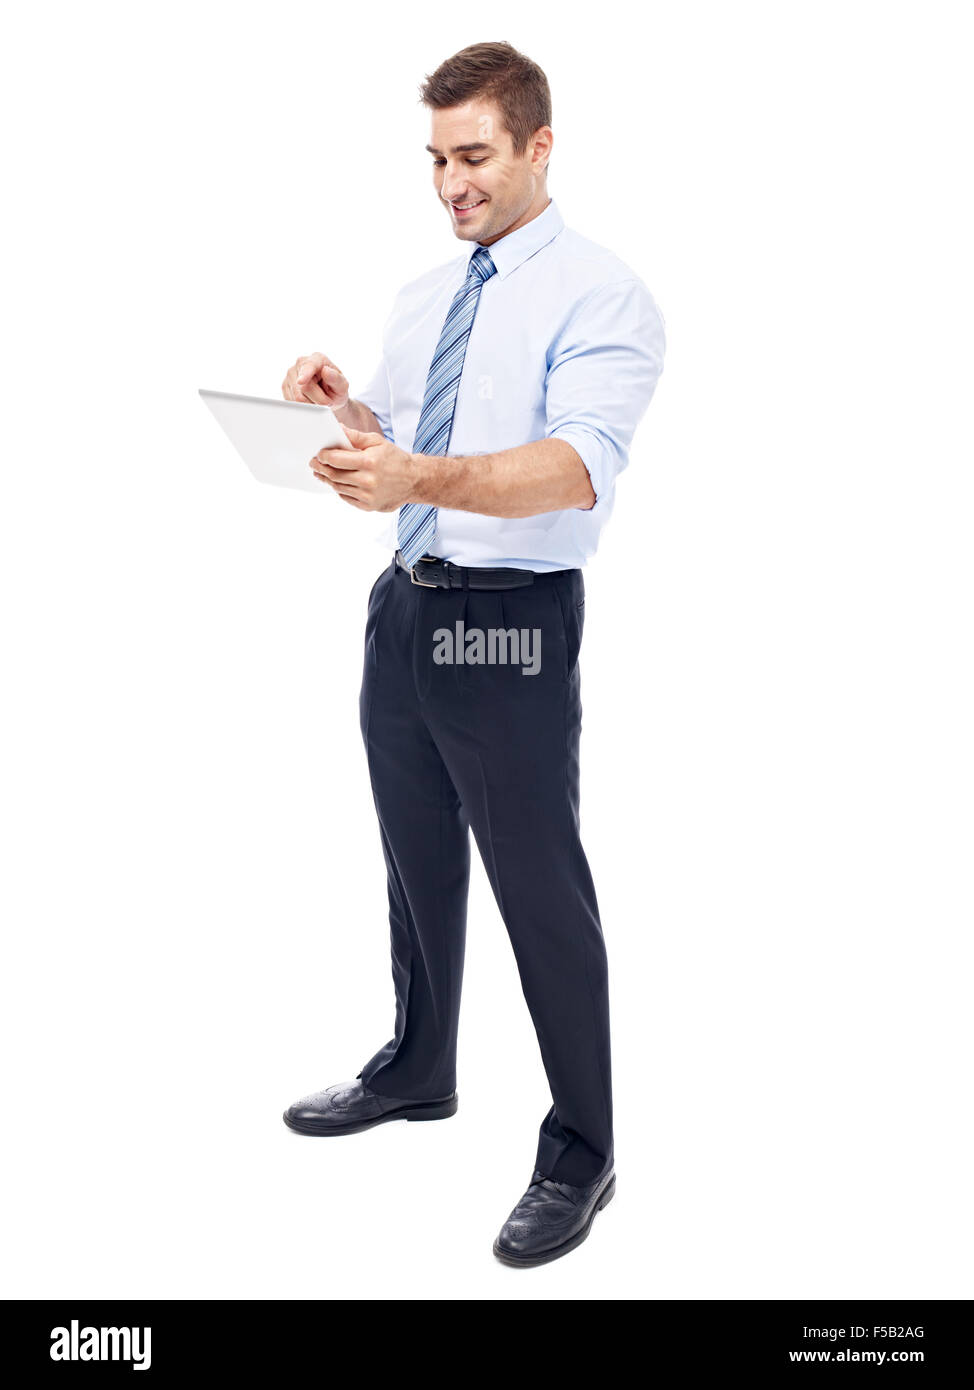 caucasian corporate executive with tablet computer Stock Photo